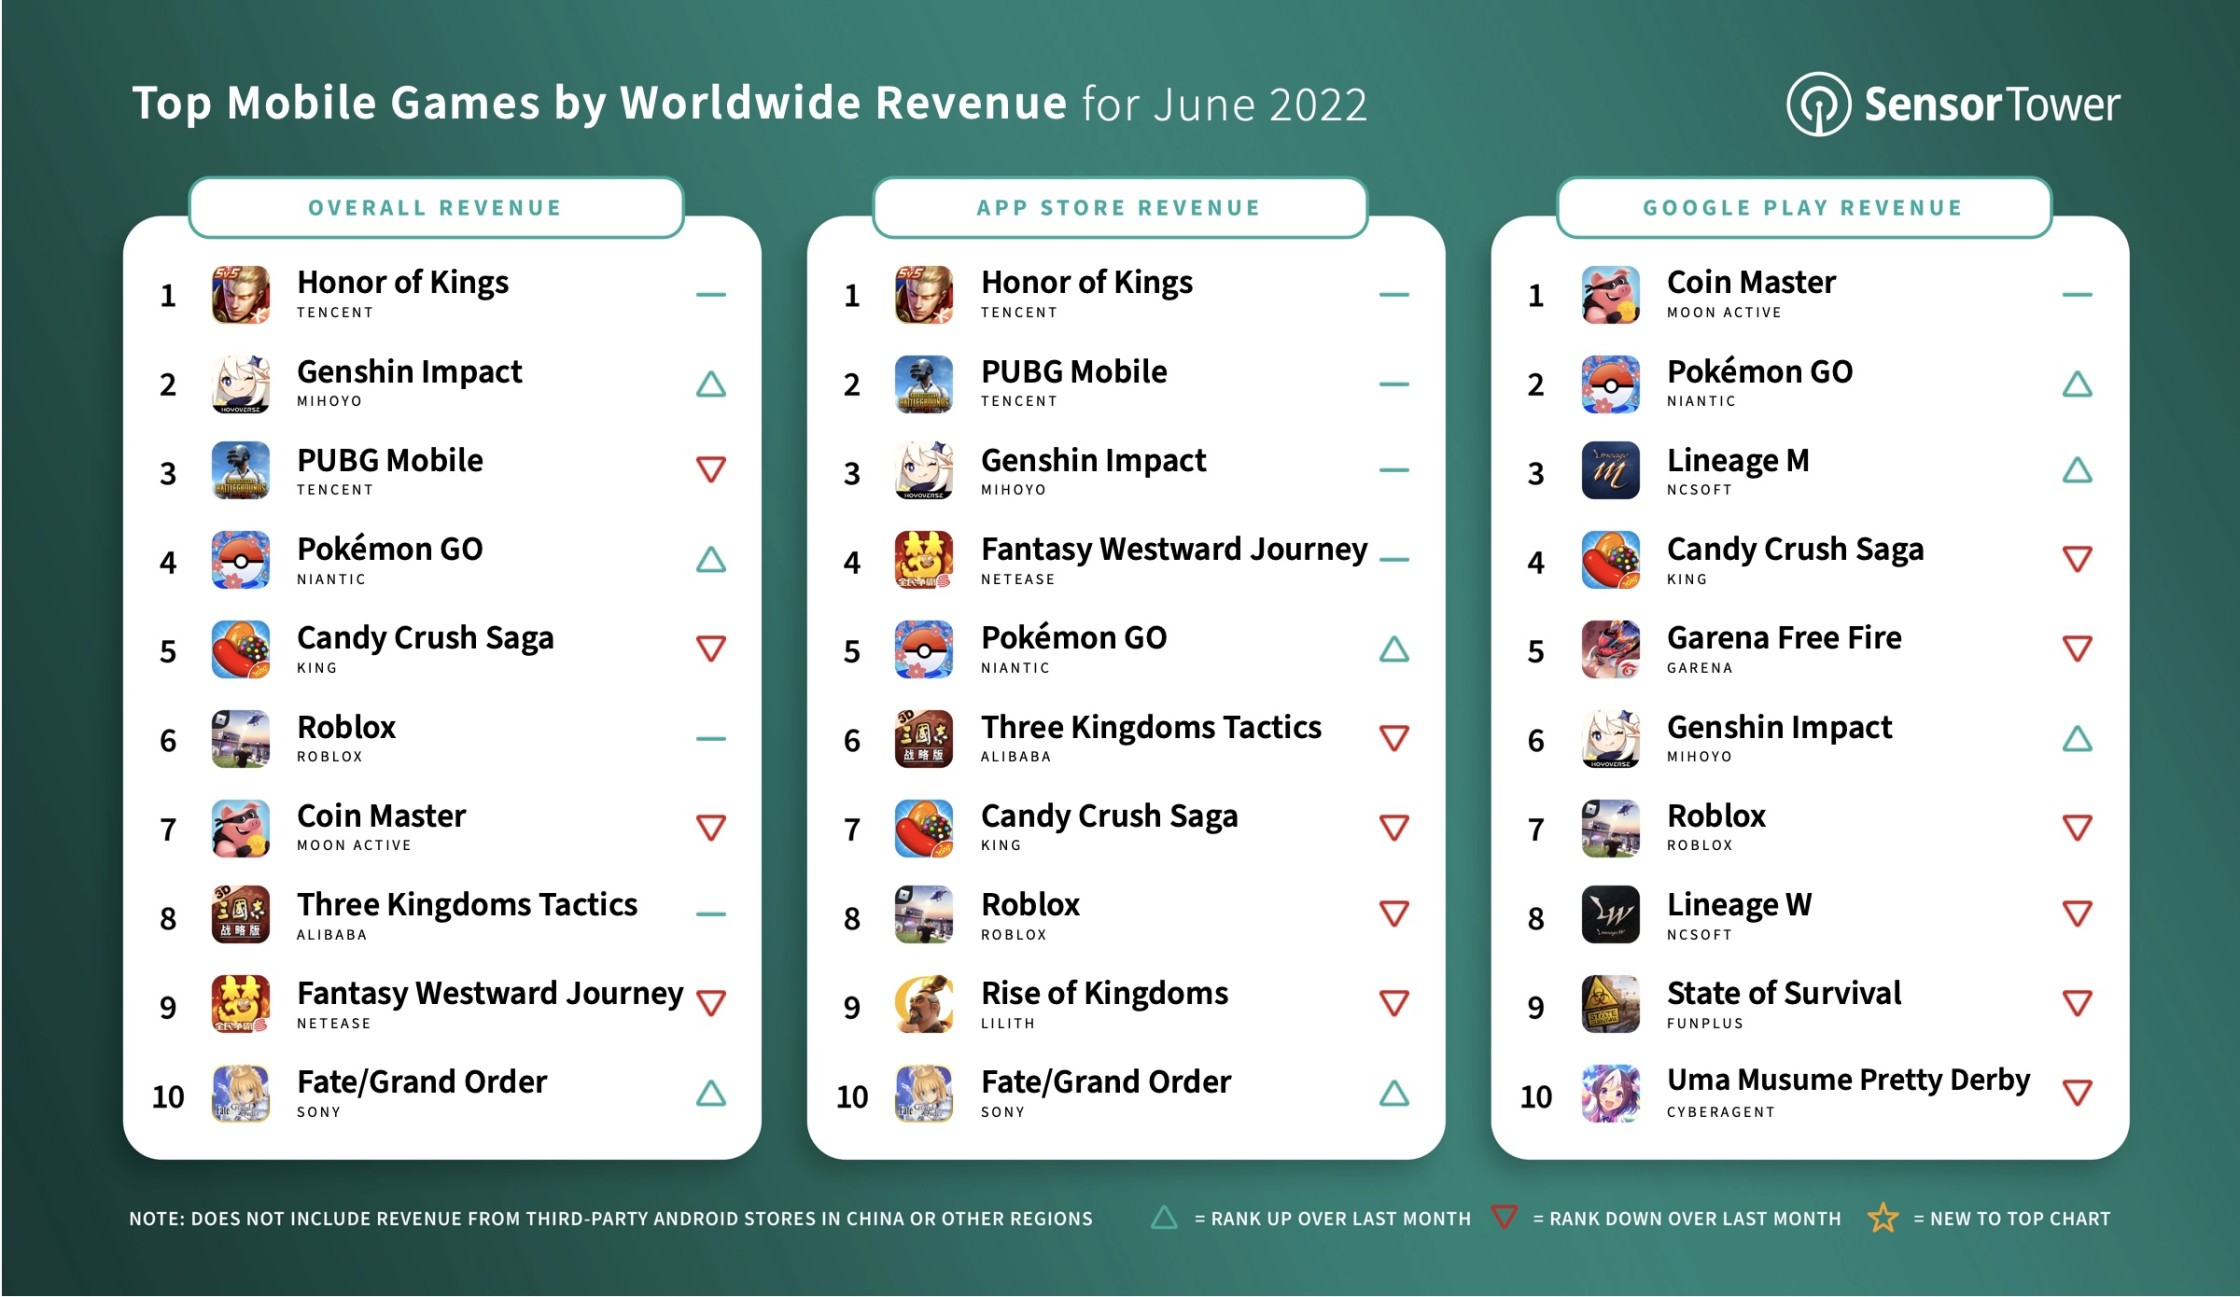 Top Grossing Mobile Games Worldwide for June 2022